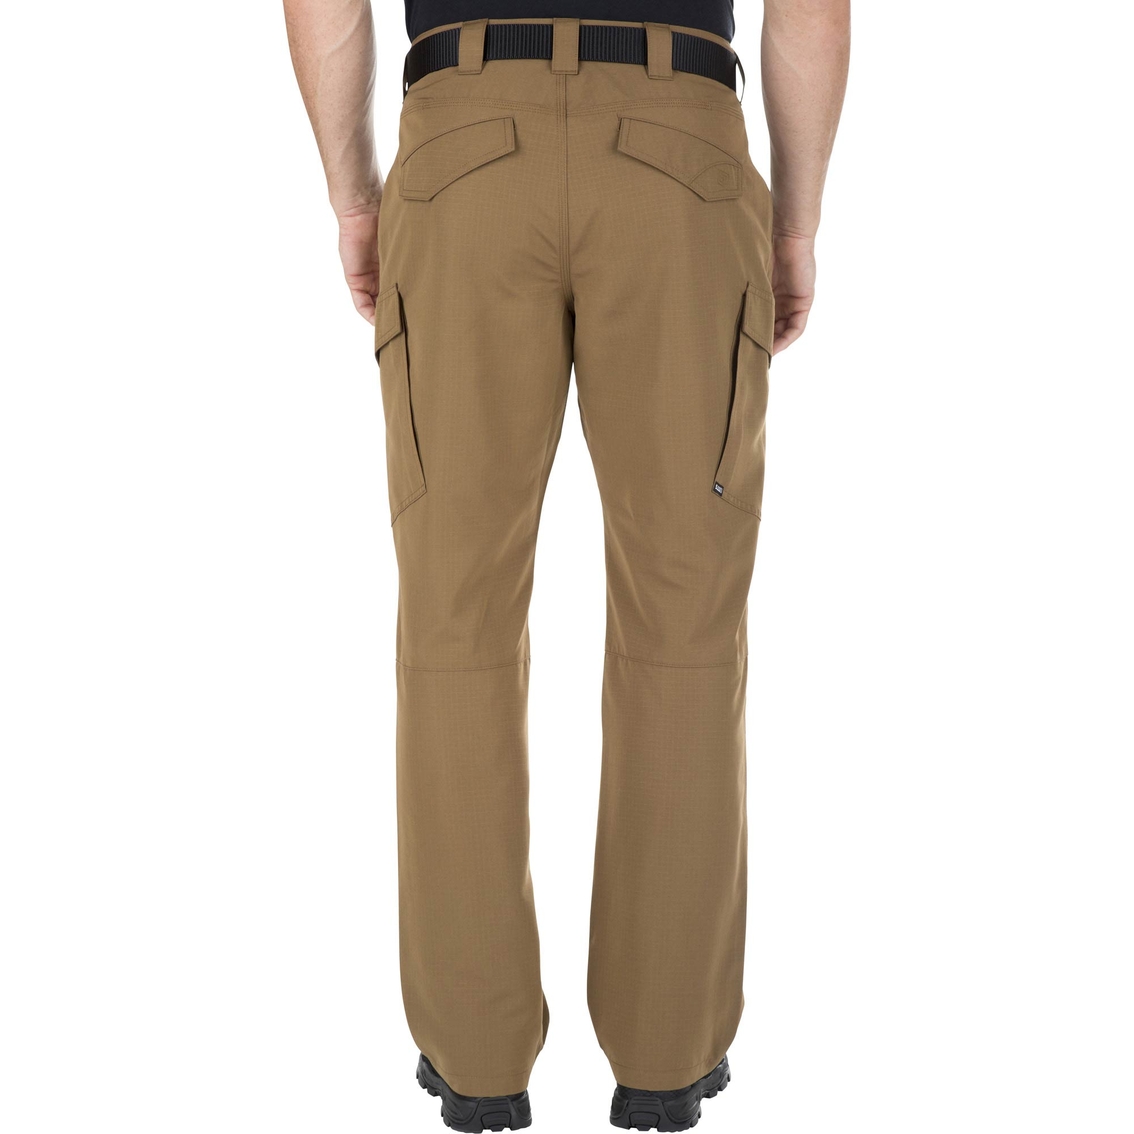 5.11 Fast Tac Cargo Pants - Image 2 of 3